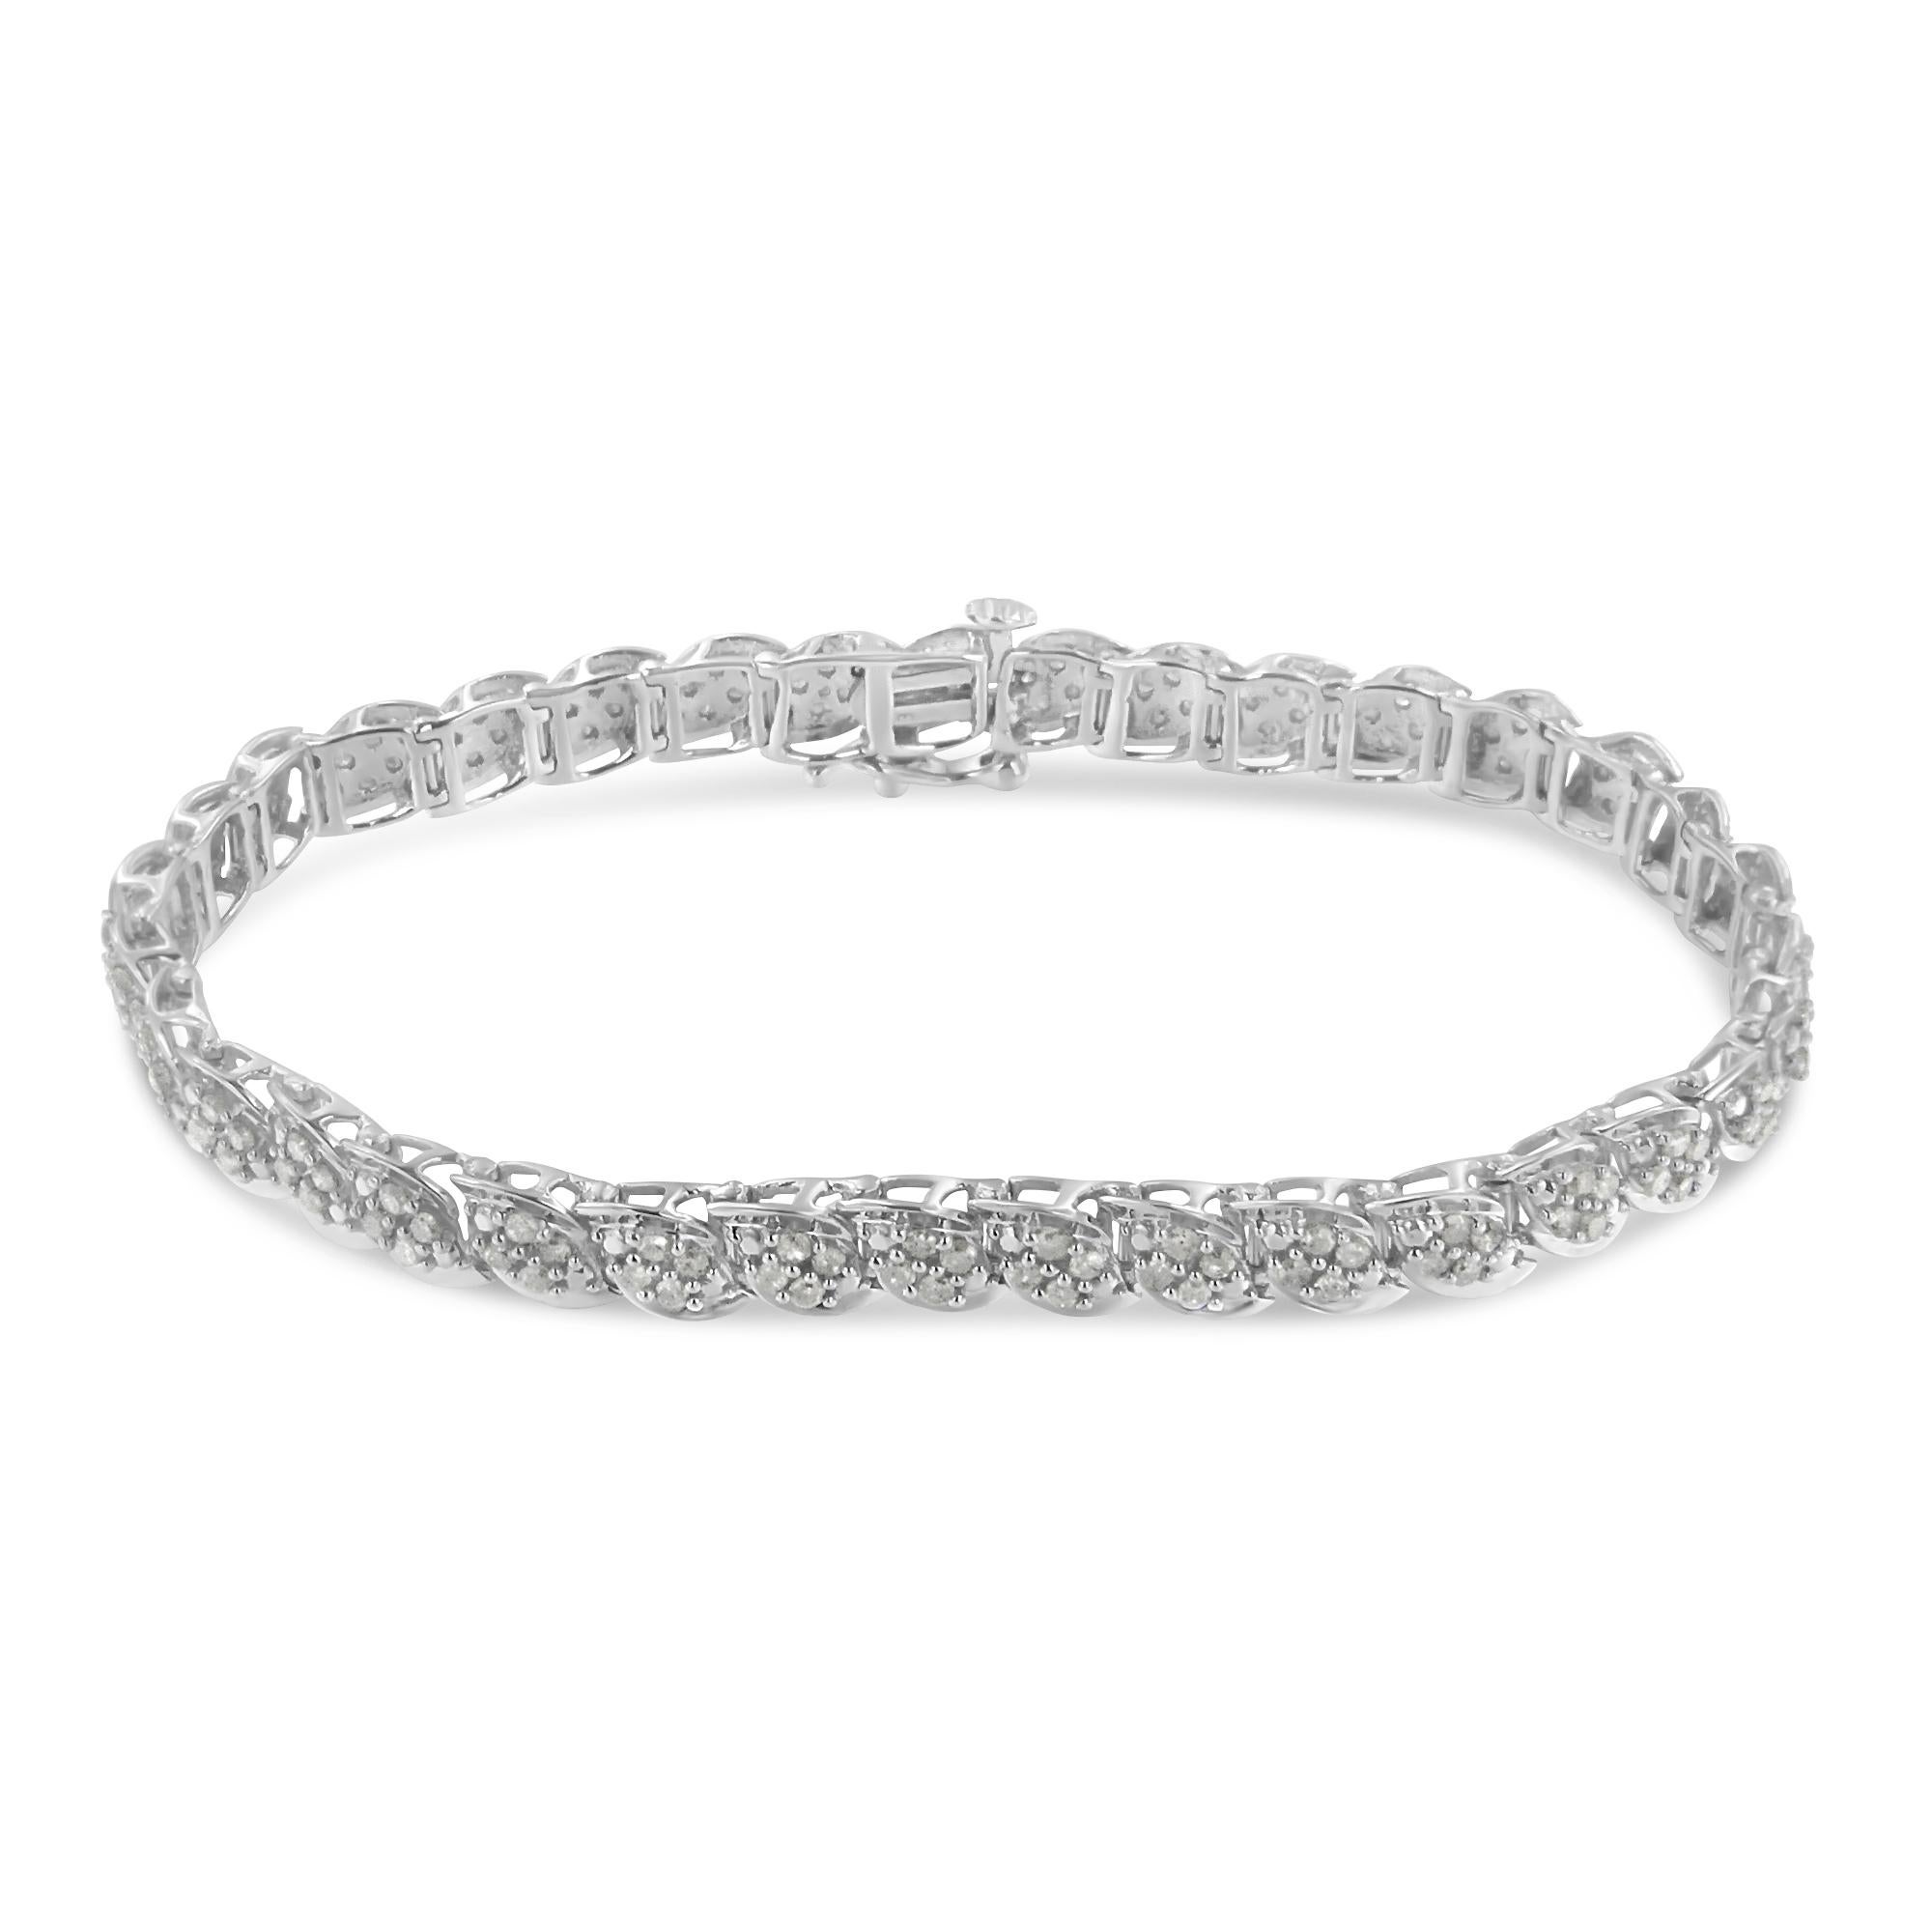 Add a touch of elegance to any outfit with this stunning white sterling silver bracelet. Embellished with diamonds in a prong setting to make up a total of 2 ct, this piece is meticulously crafted in a link design. This bracelet is made up of 140